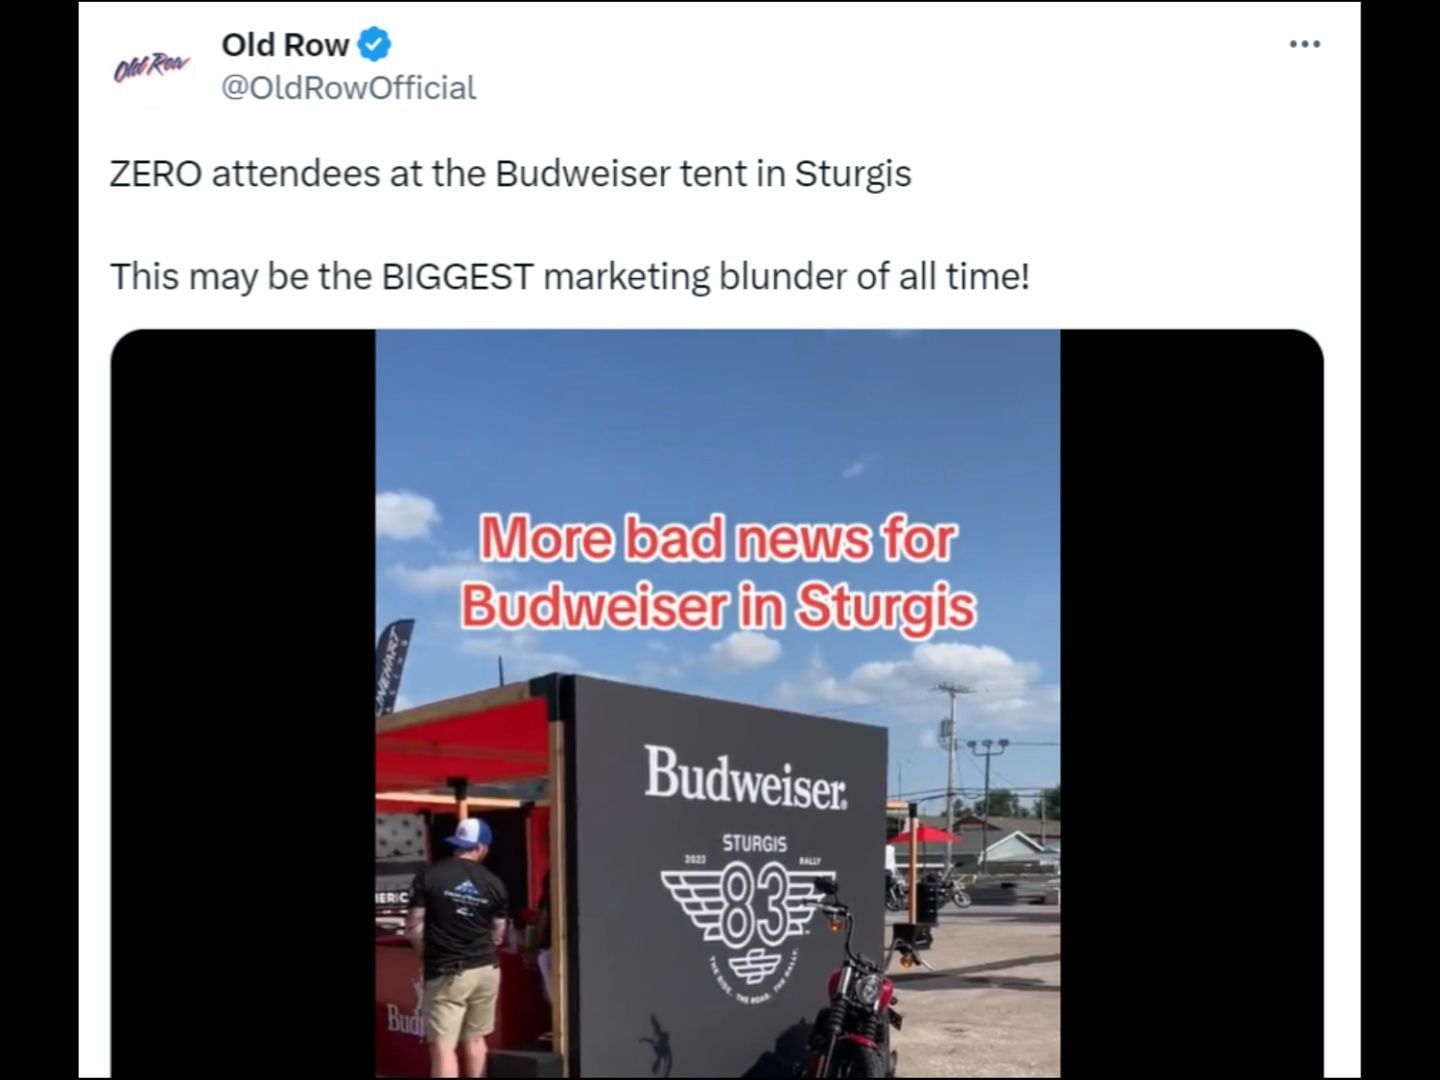 No attendee shows up at Budweiser&#039;s booth at the Sturgis motorcycle rally. (Image via X/Old Row)